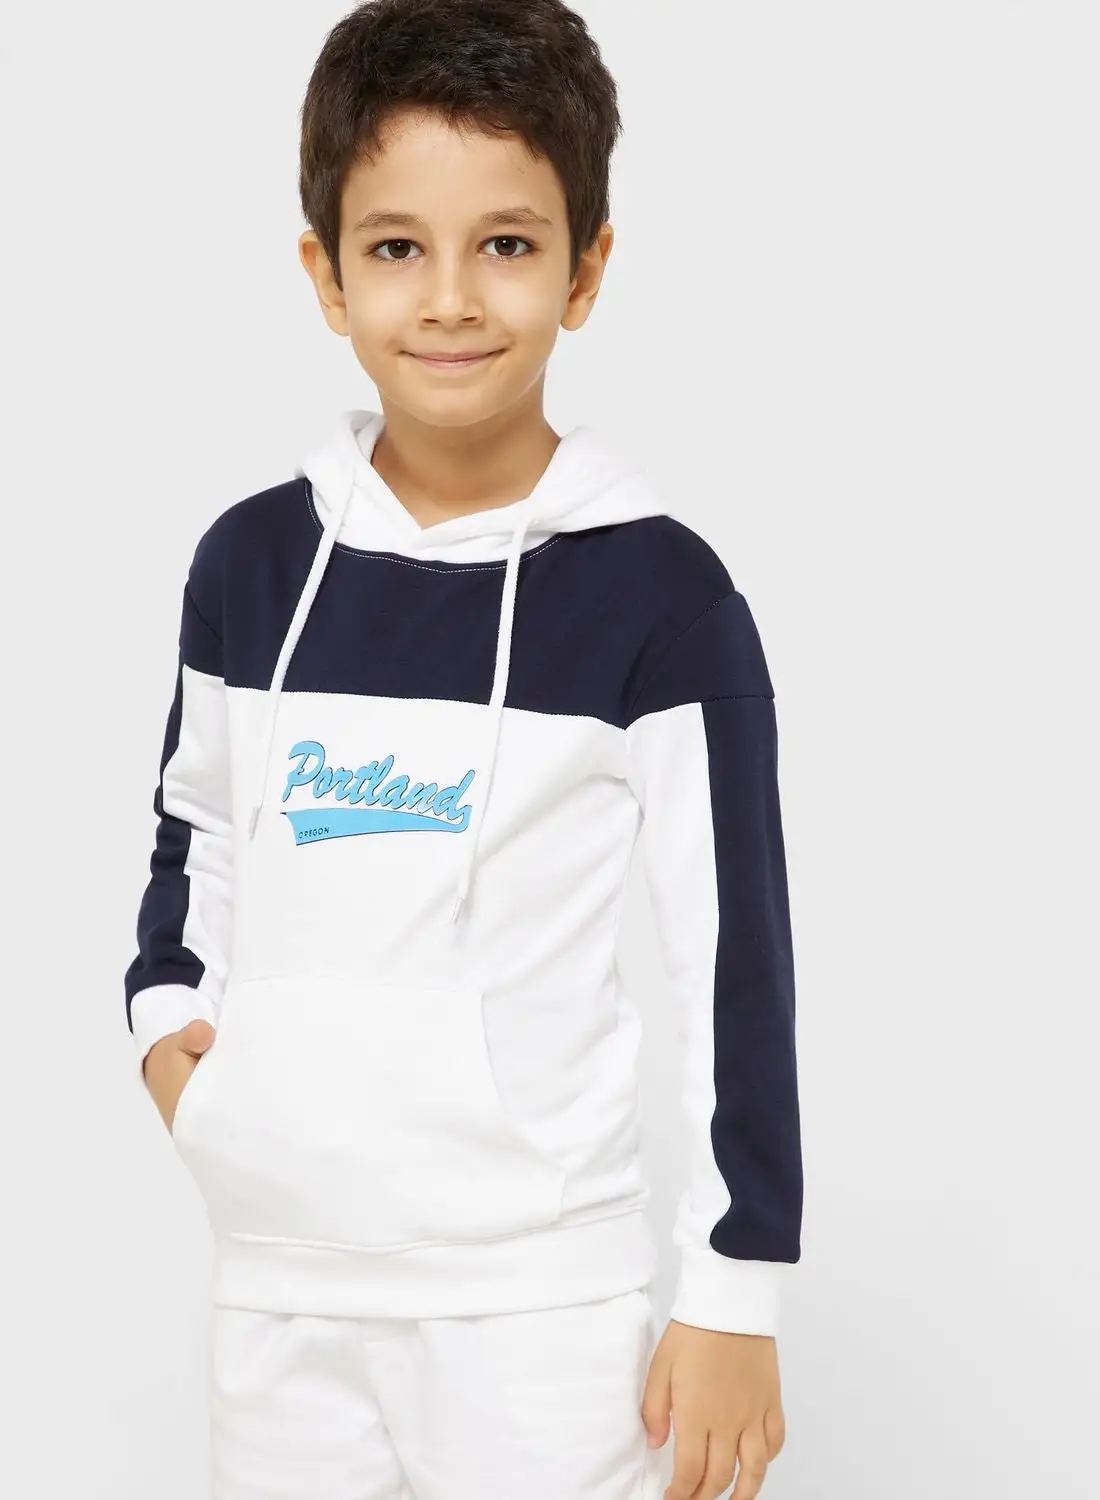 Pinata Holographic Foil Printed Hoodie For Boys